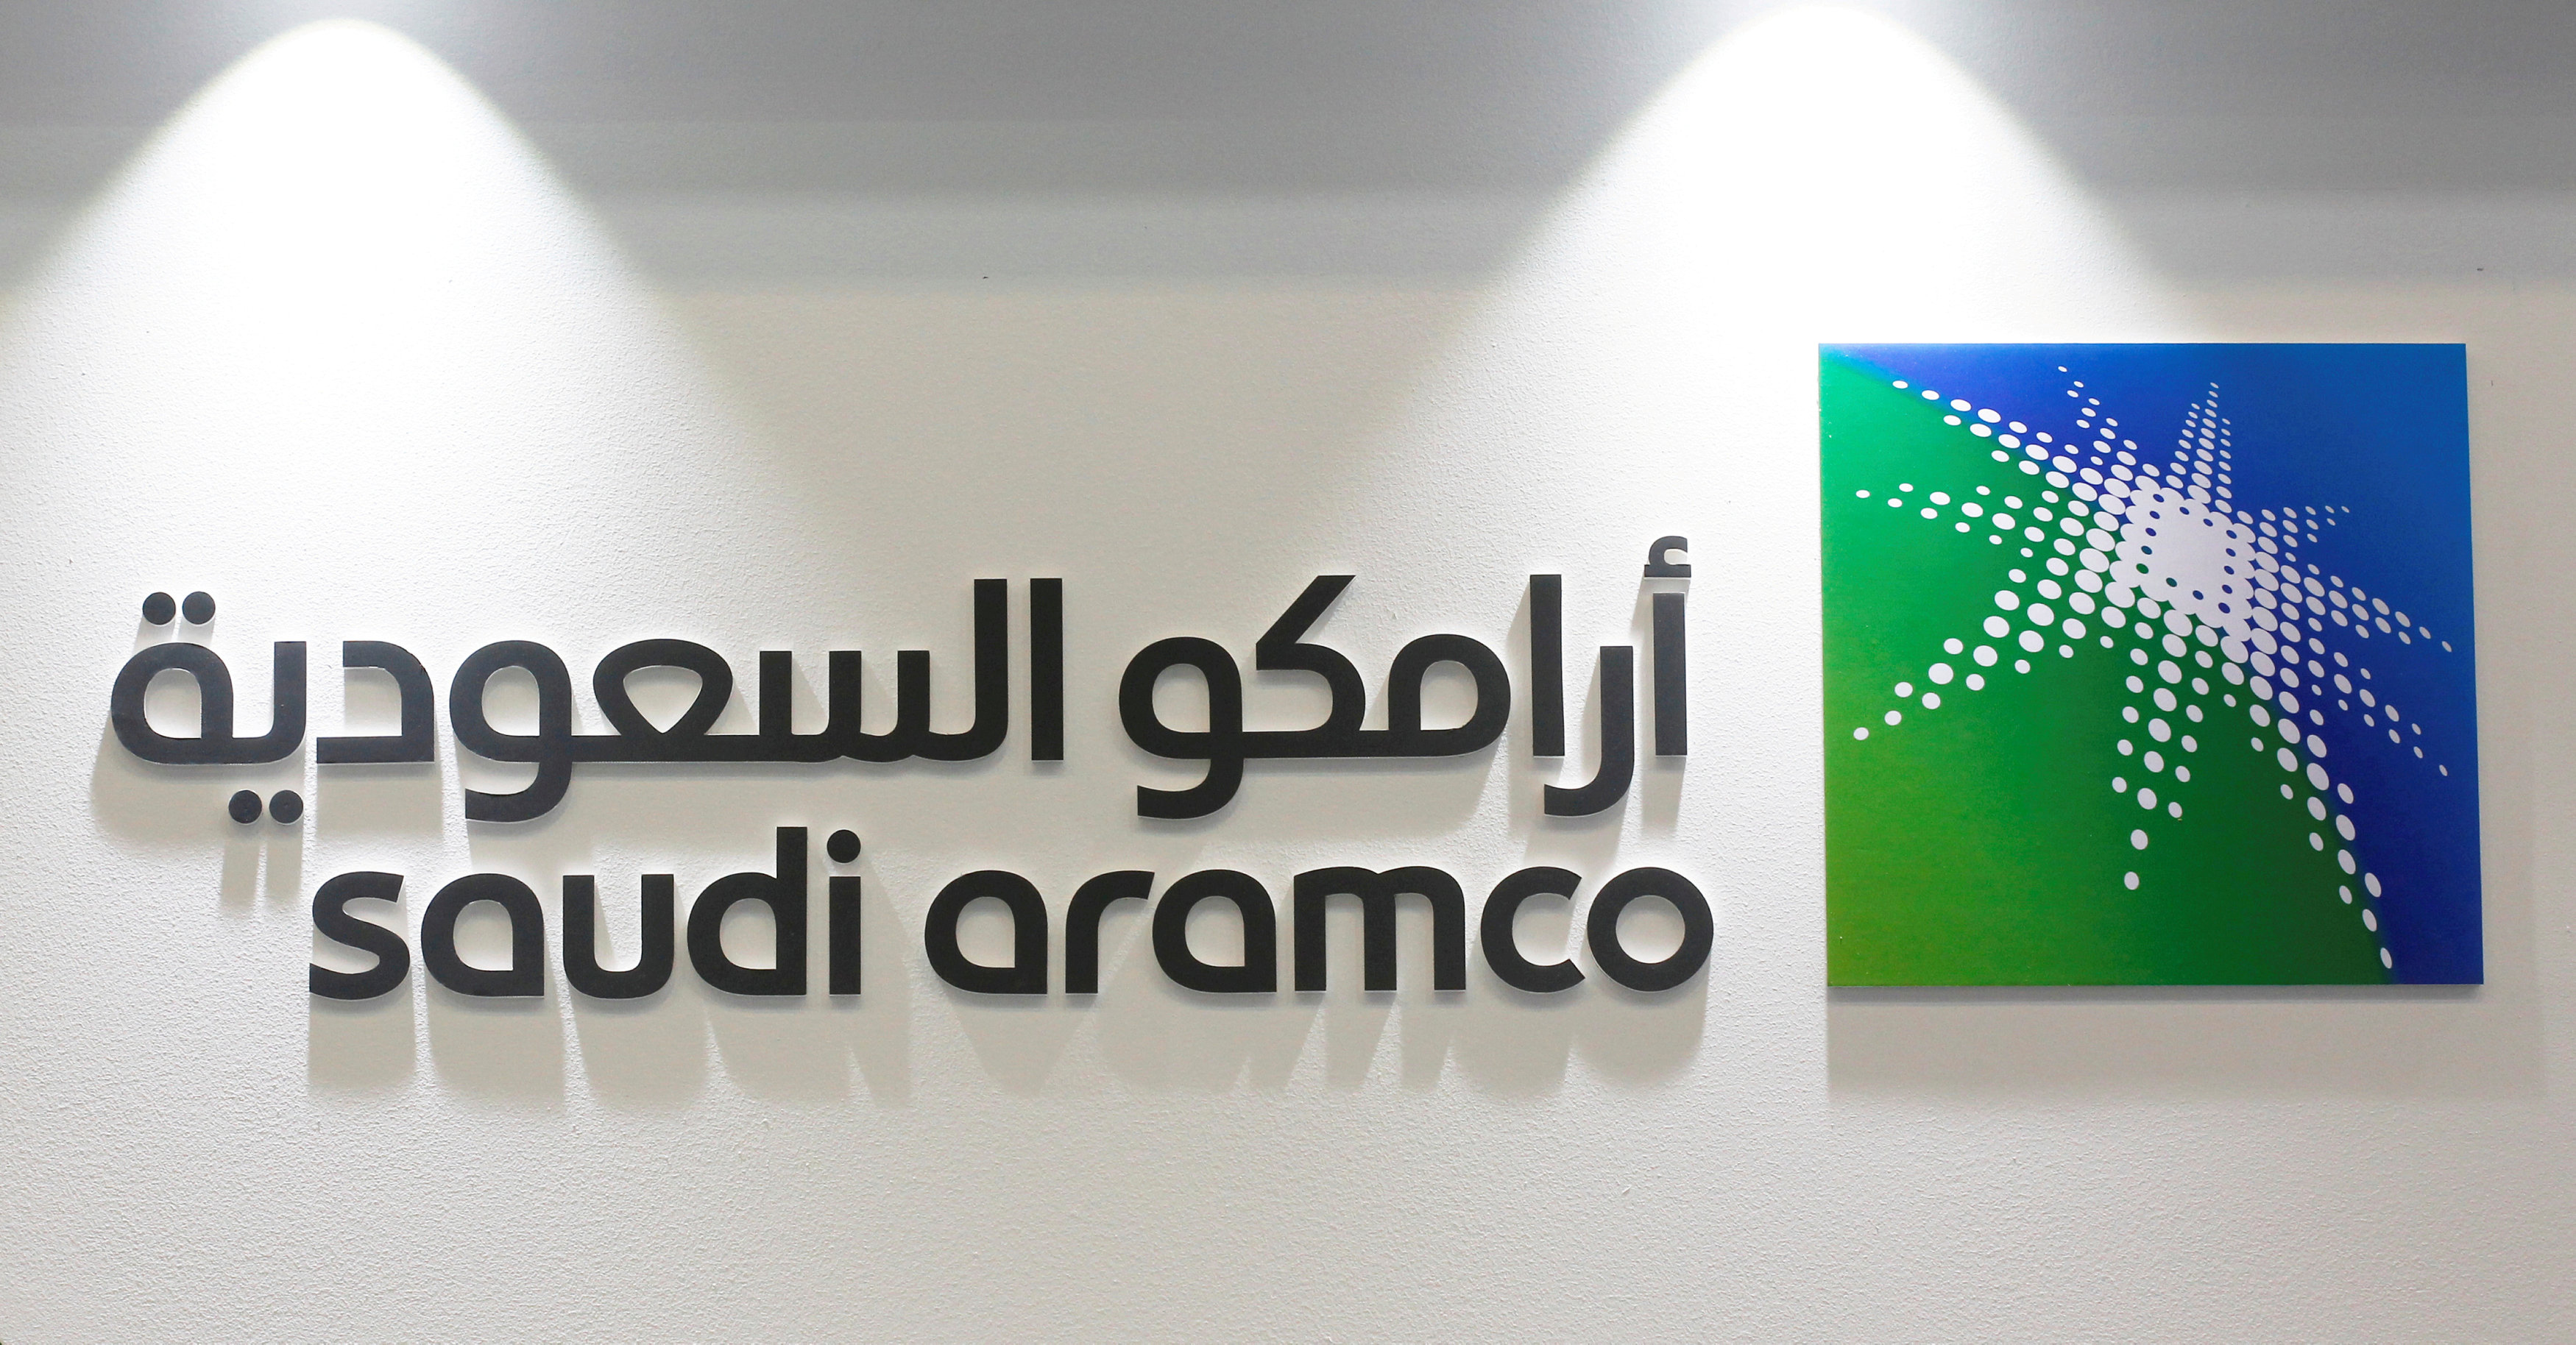 Saudi Aramco receives bids for contracts in gas expansion drive